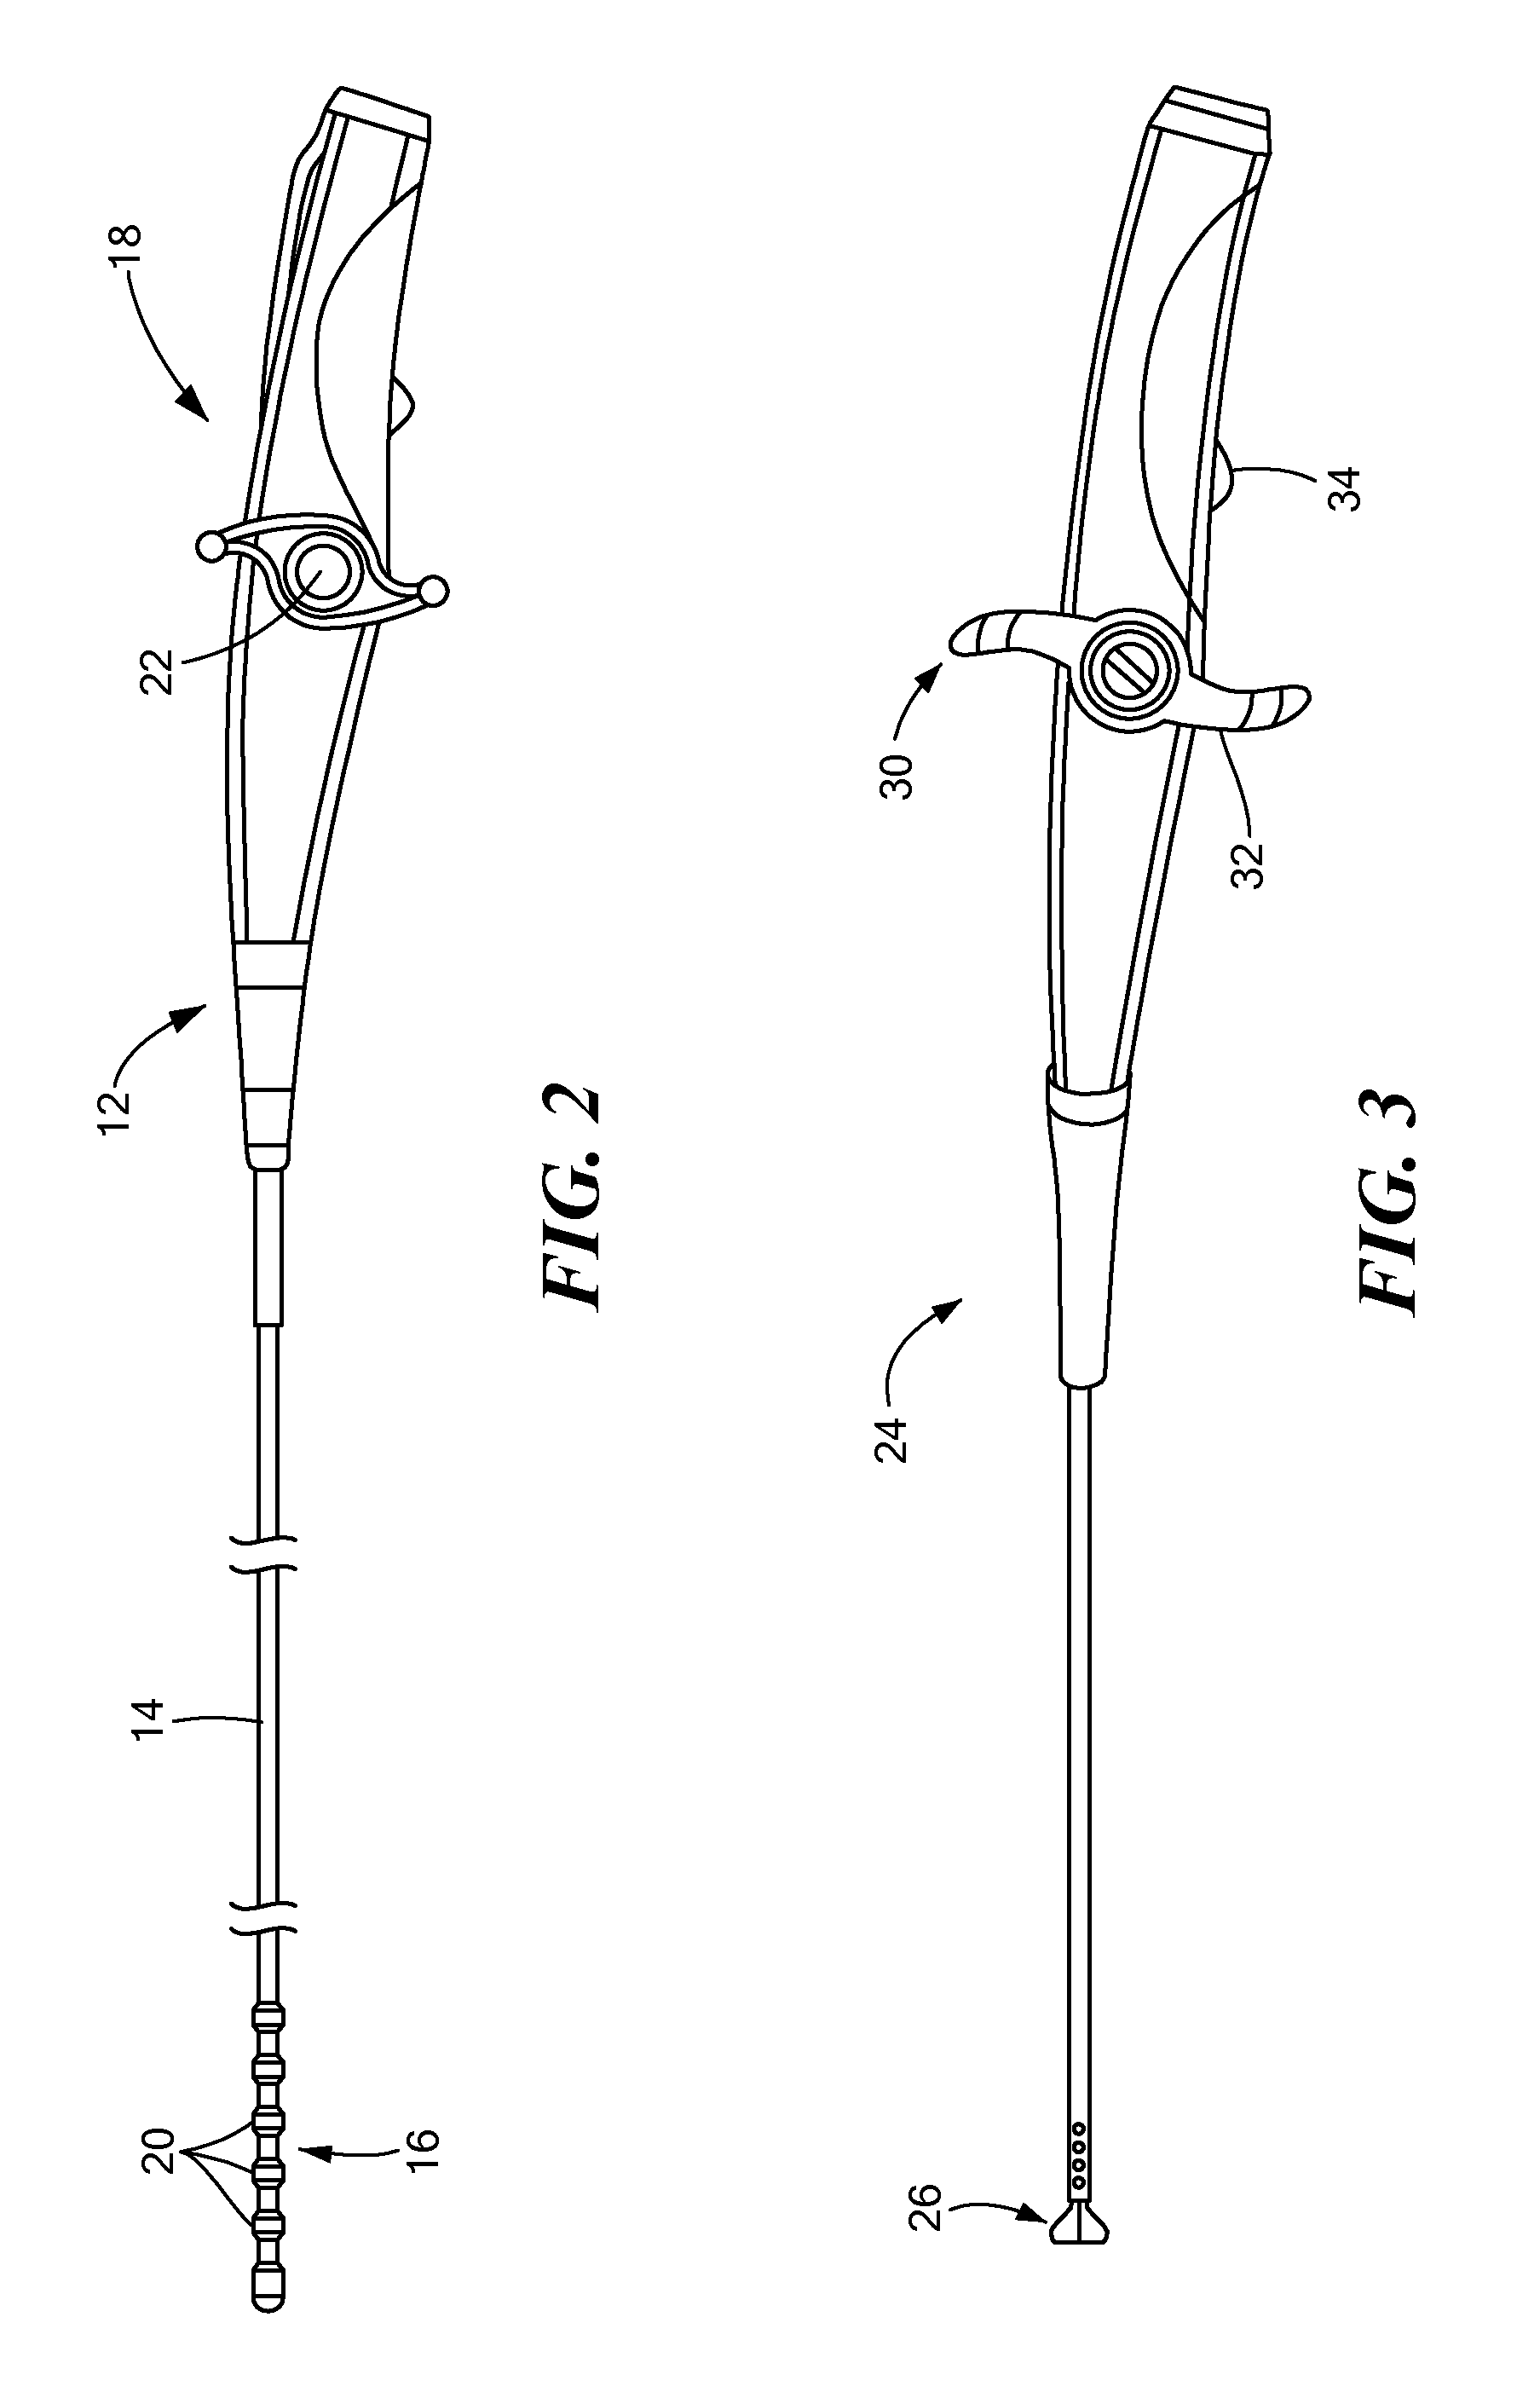 Intermittent short circuit detection on a multi-electrode catheter